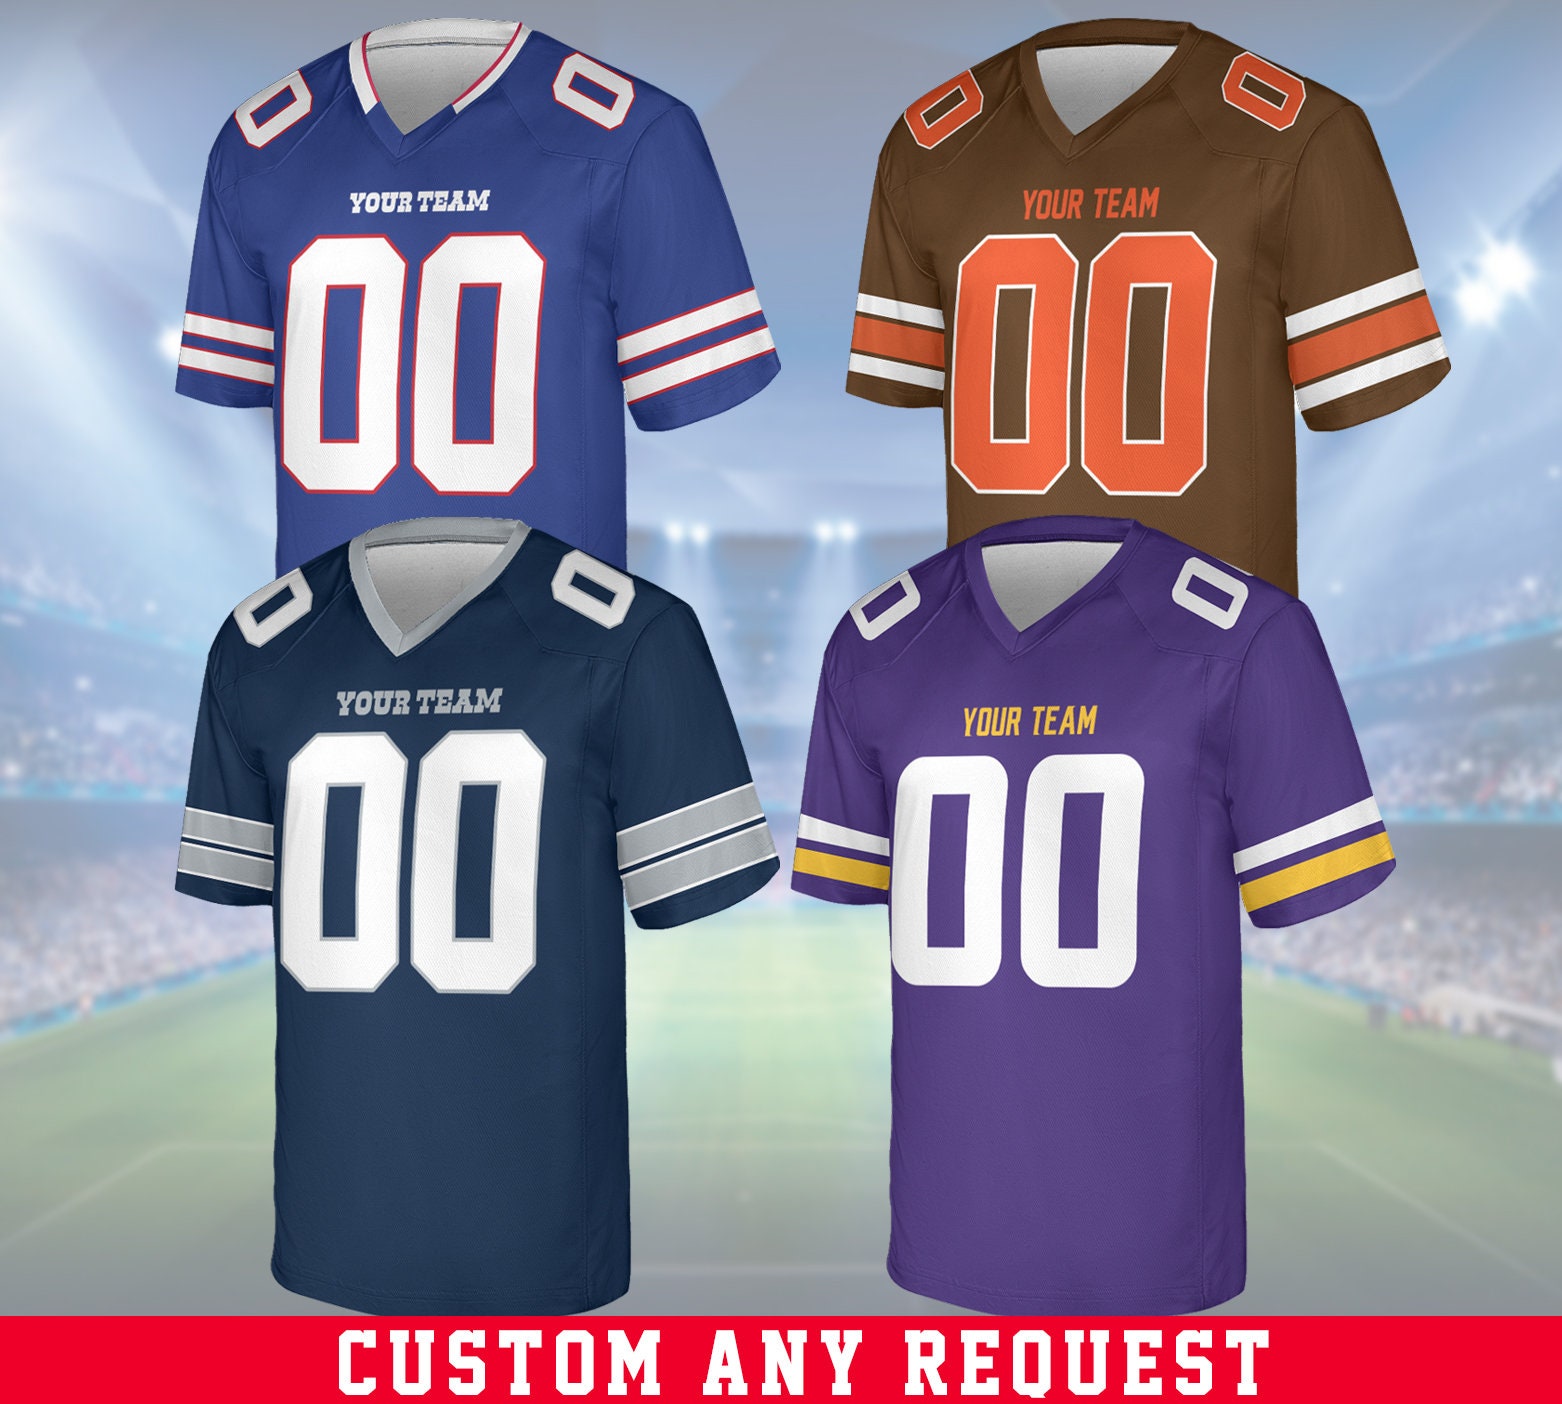 Source New Style Plain Team Custom Sublimation American Football Jersey Hot  sale new design sublimation American football uniform on m.